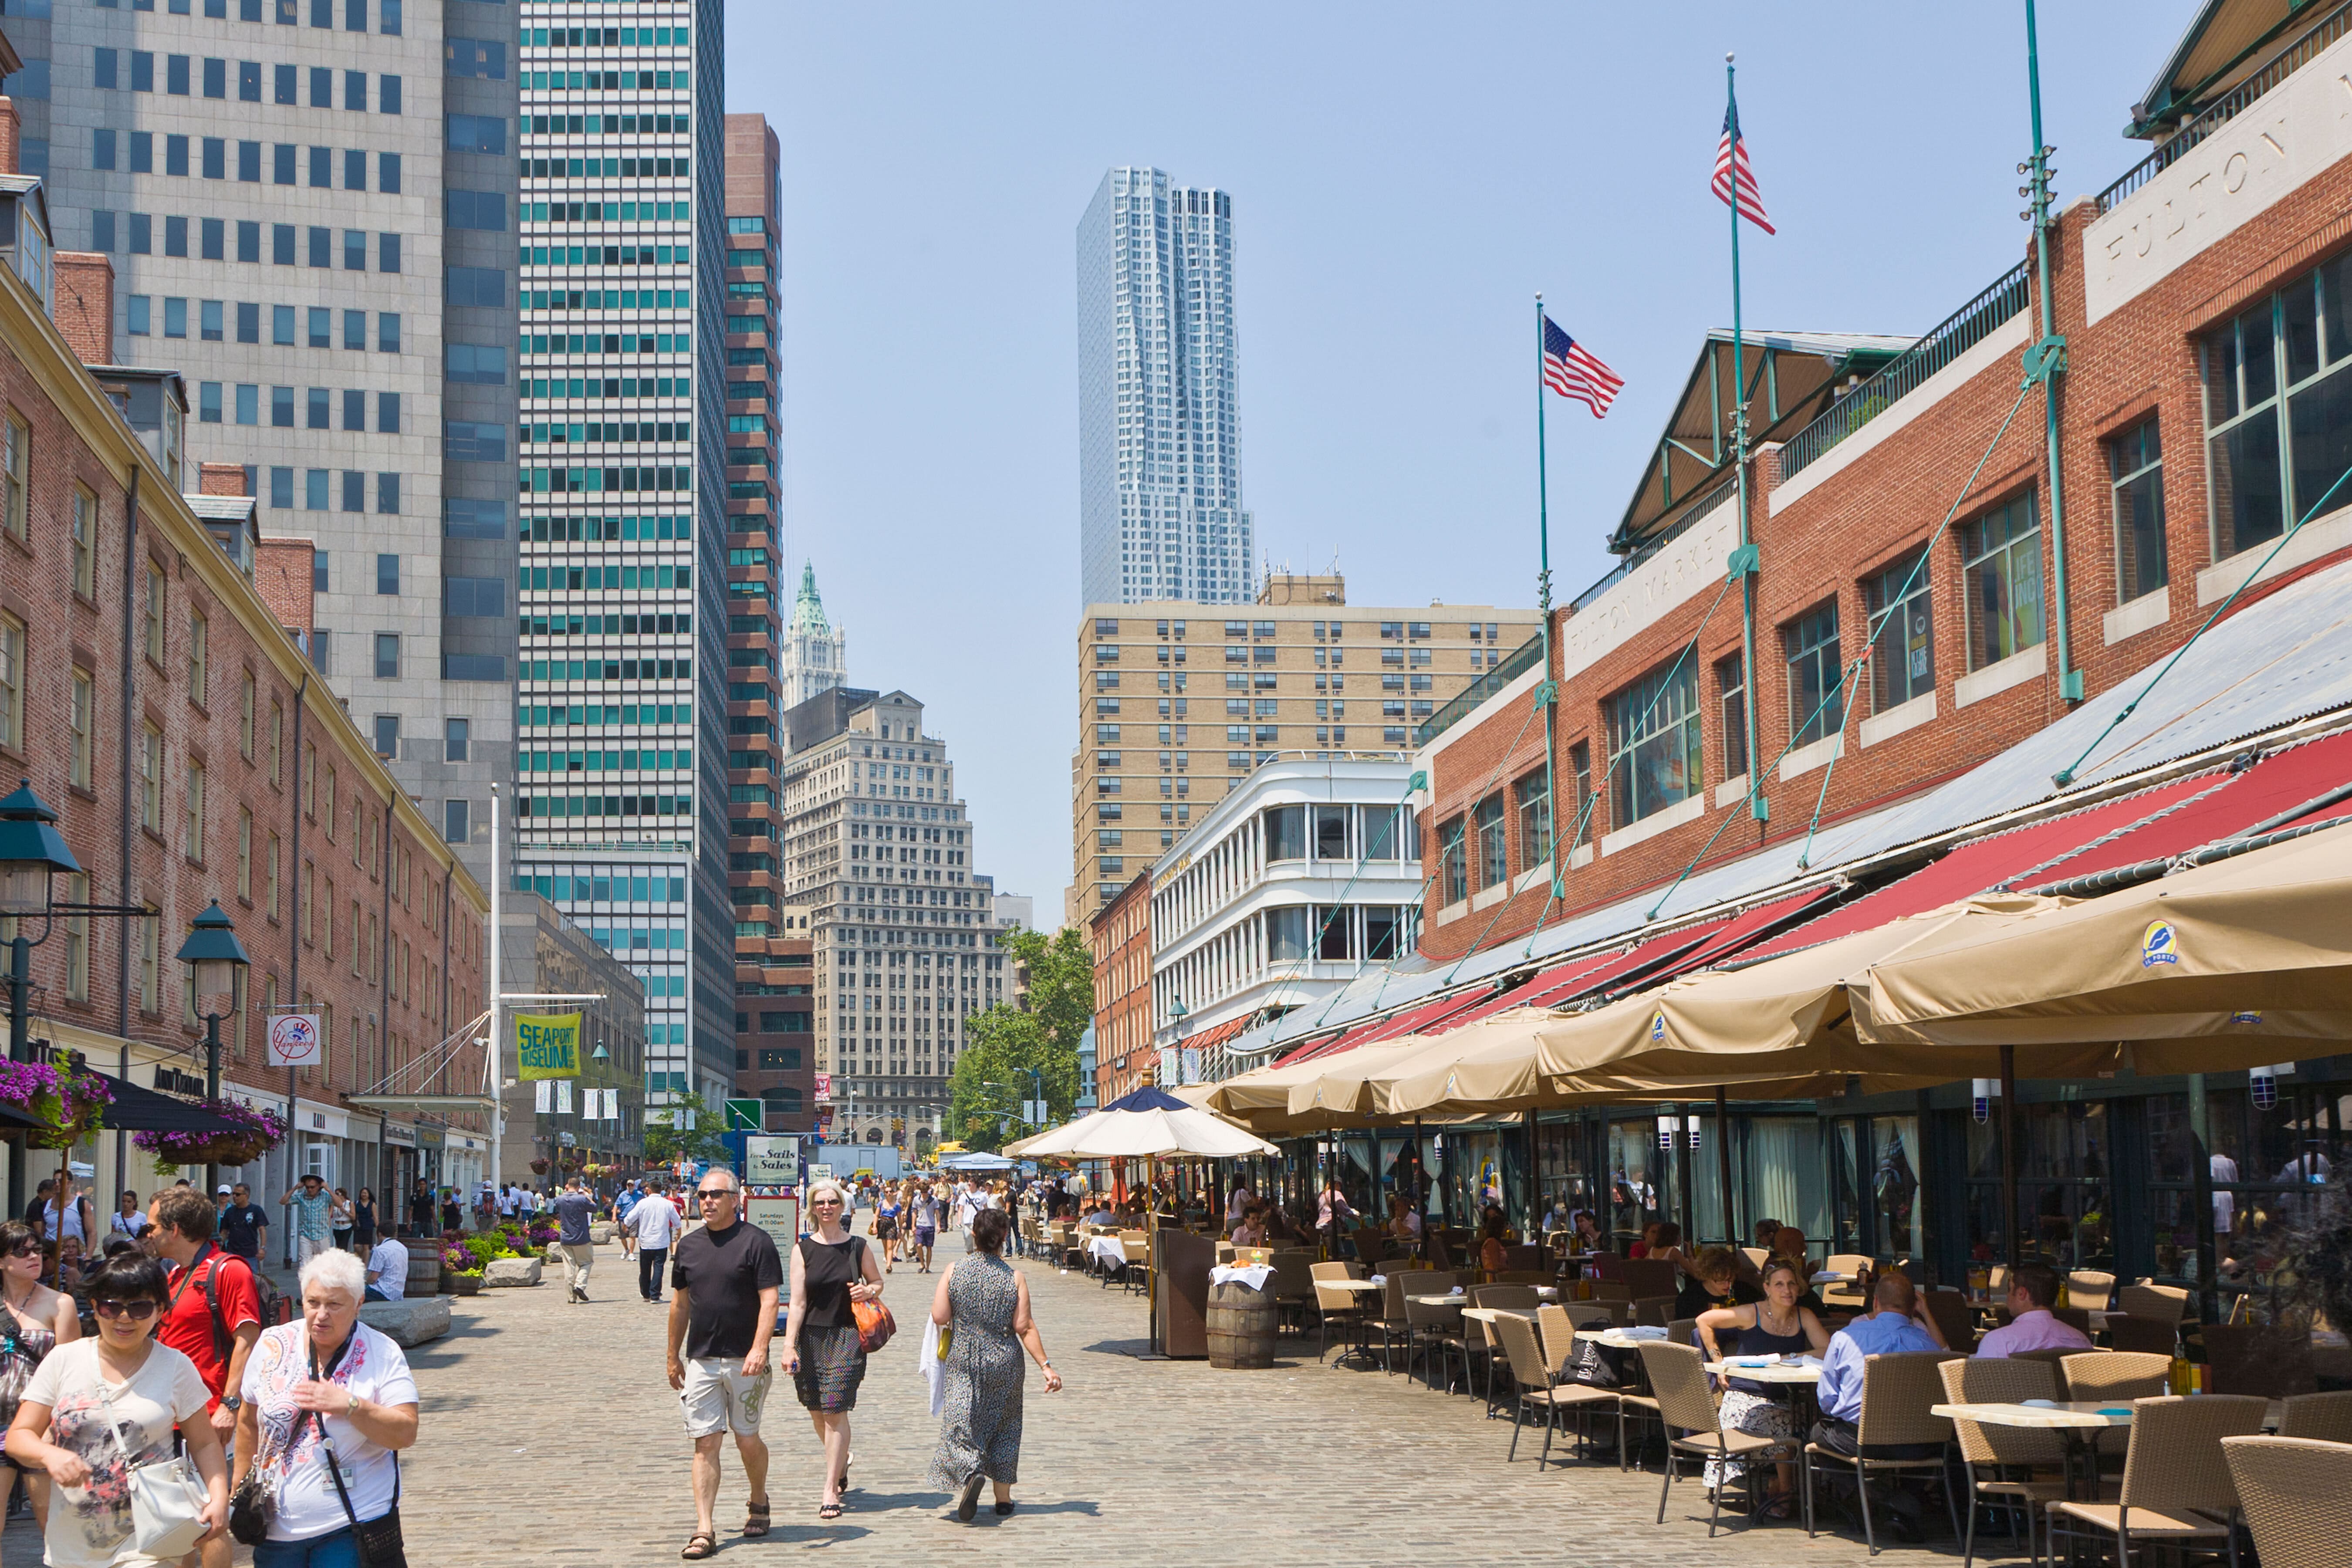 The Historic South Street Seaport